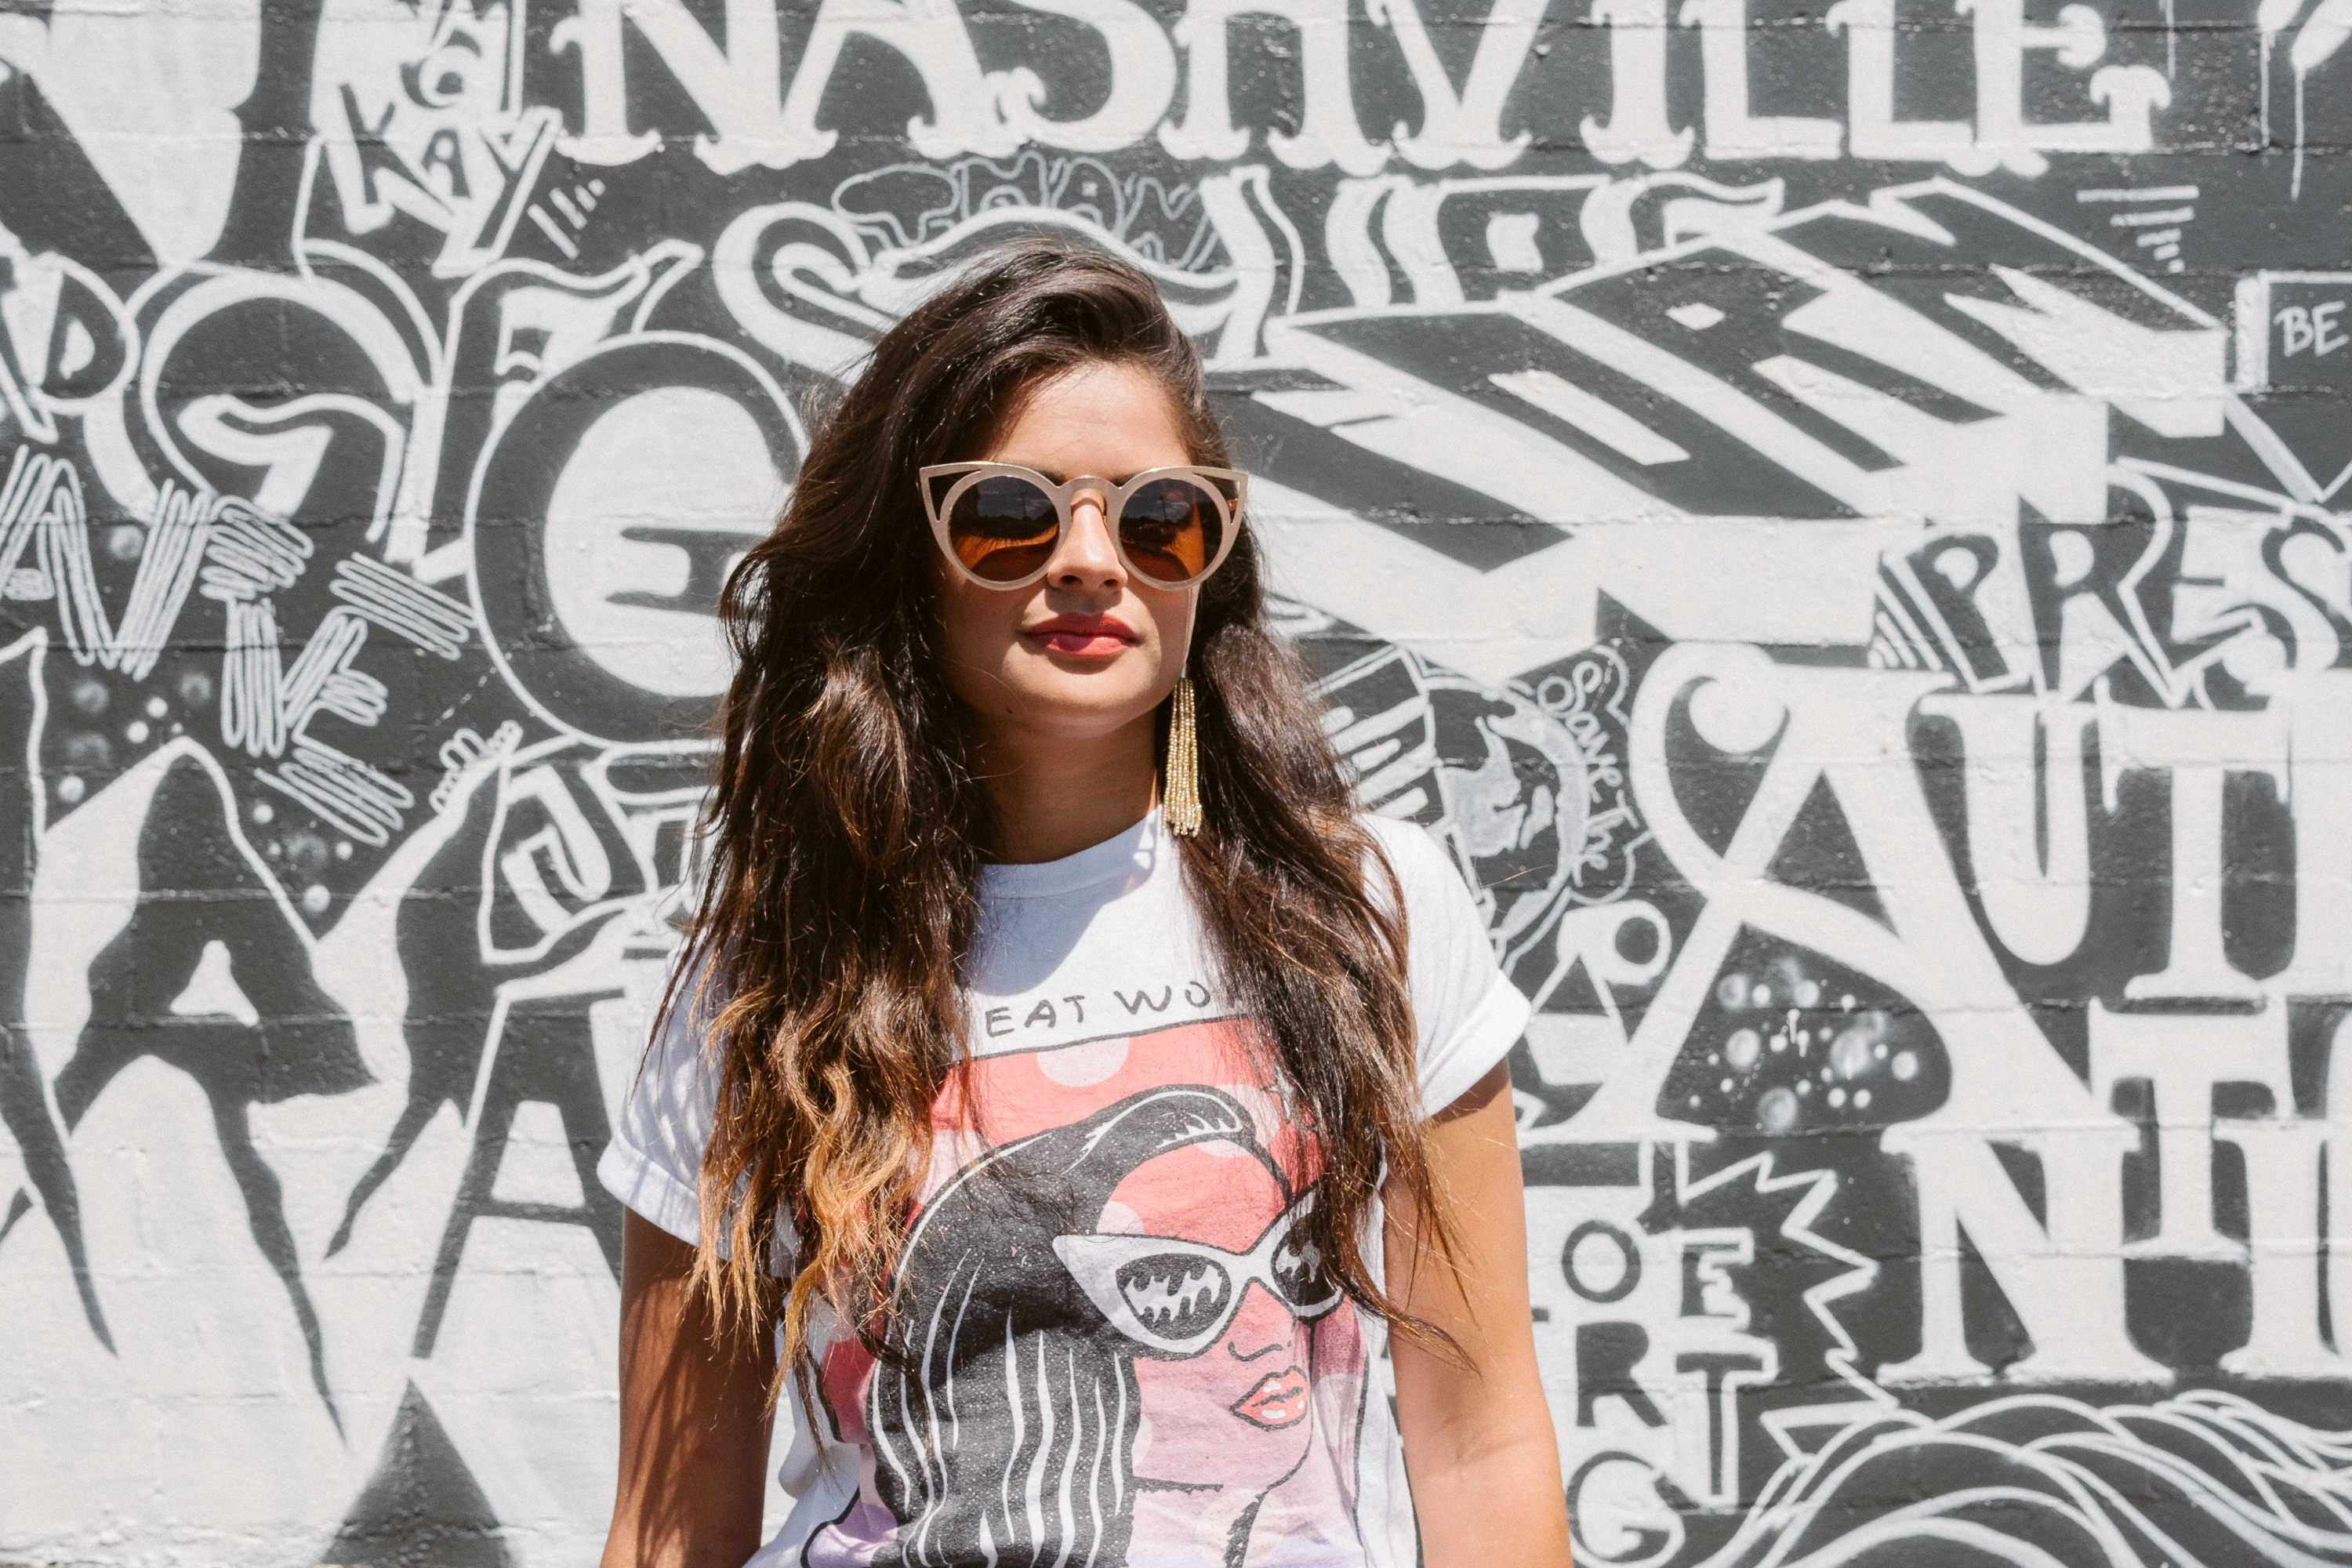 Nashville fashion blogger, Jimmy Eat World graphic tee, white color-blocked Summer outfit, gold beaded tassel earrings